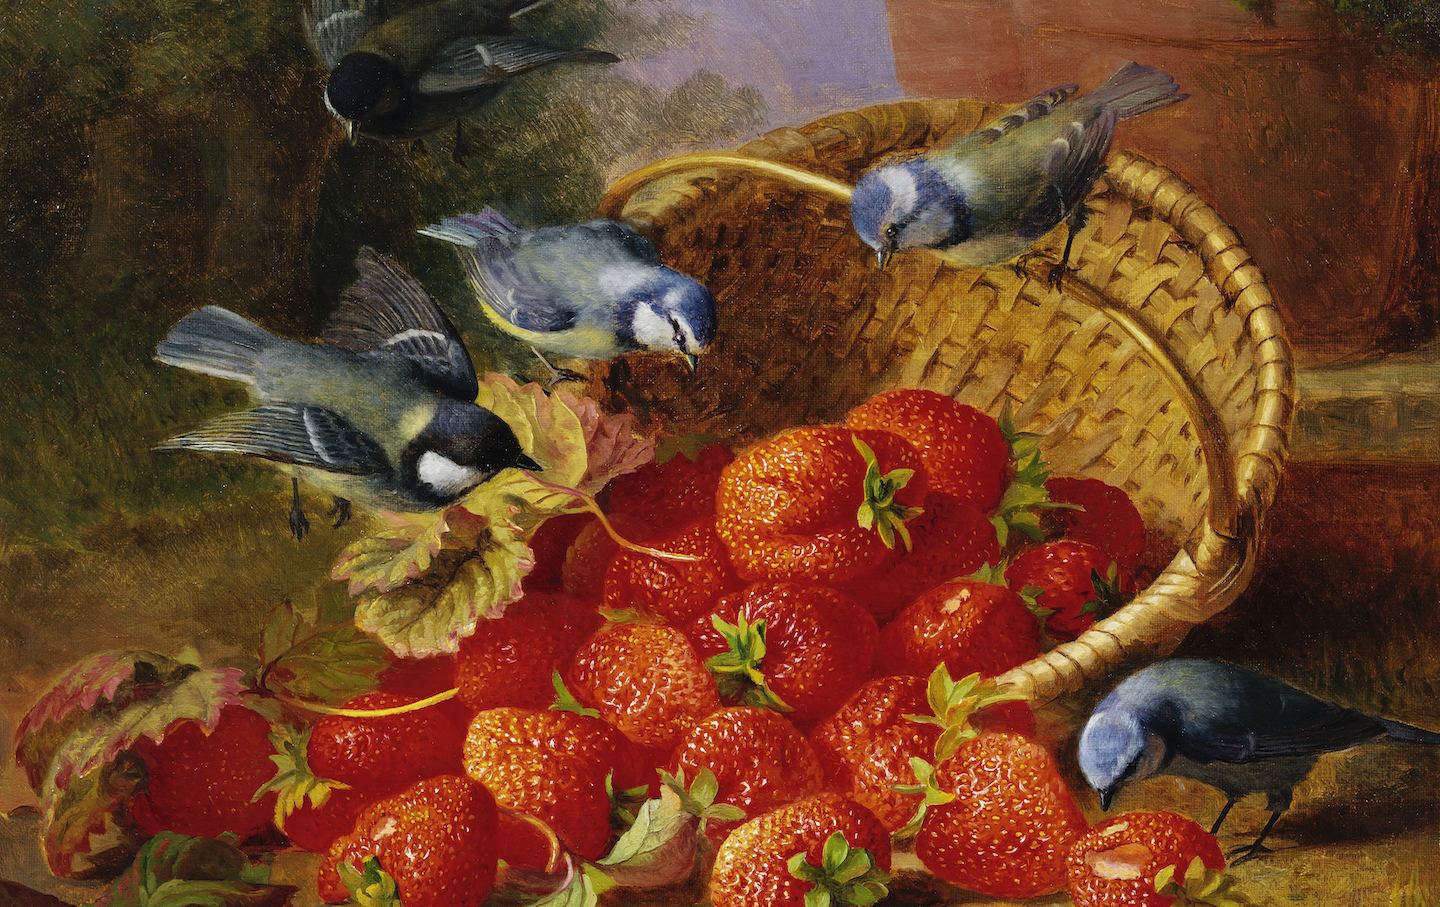 A Feast of Strawberries (Blue Tits) by Eloise Harriet Stannard